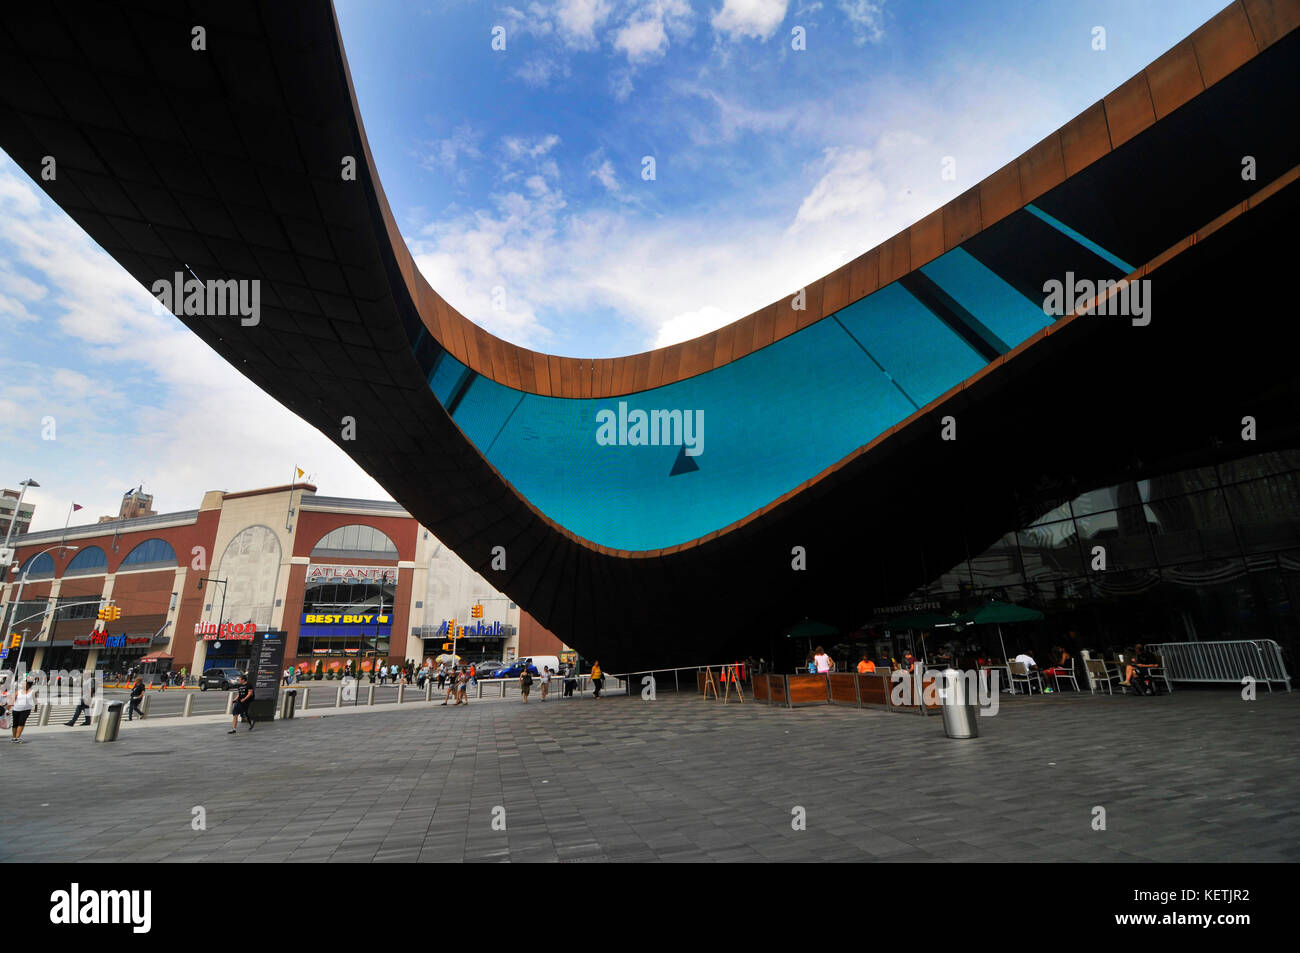 The Barclay's Center in Brooklyn, New York. Stock Photo